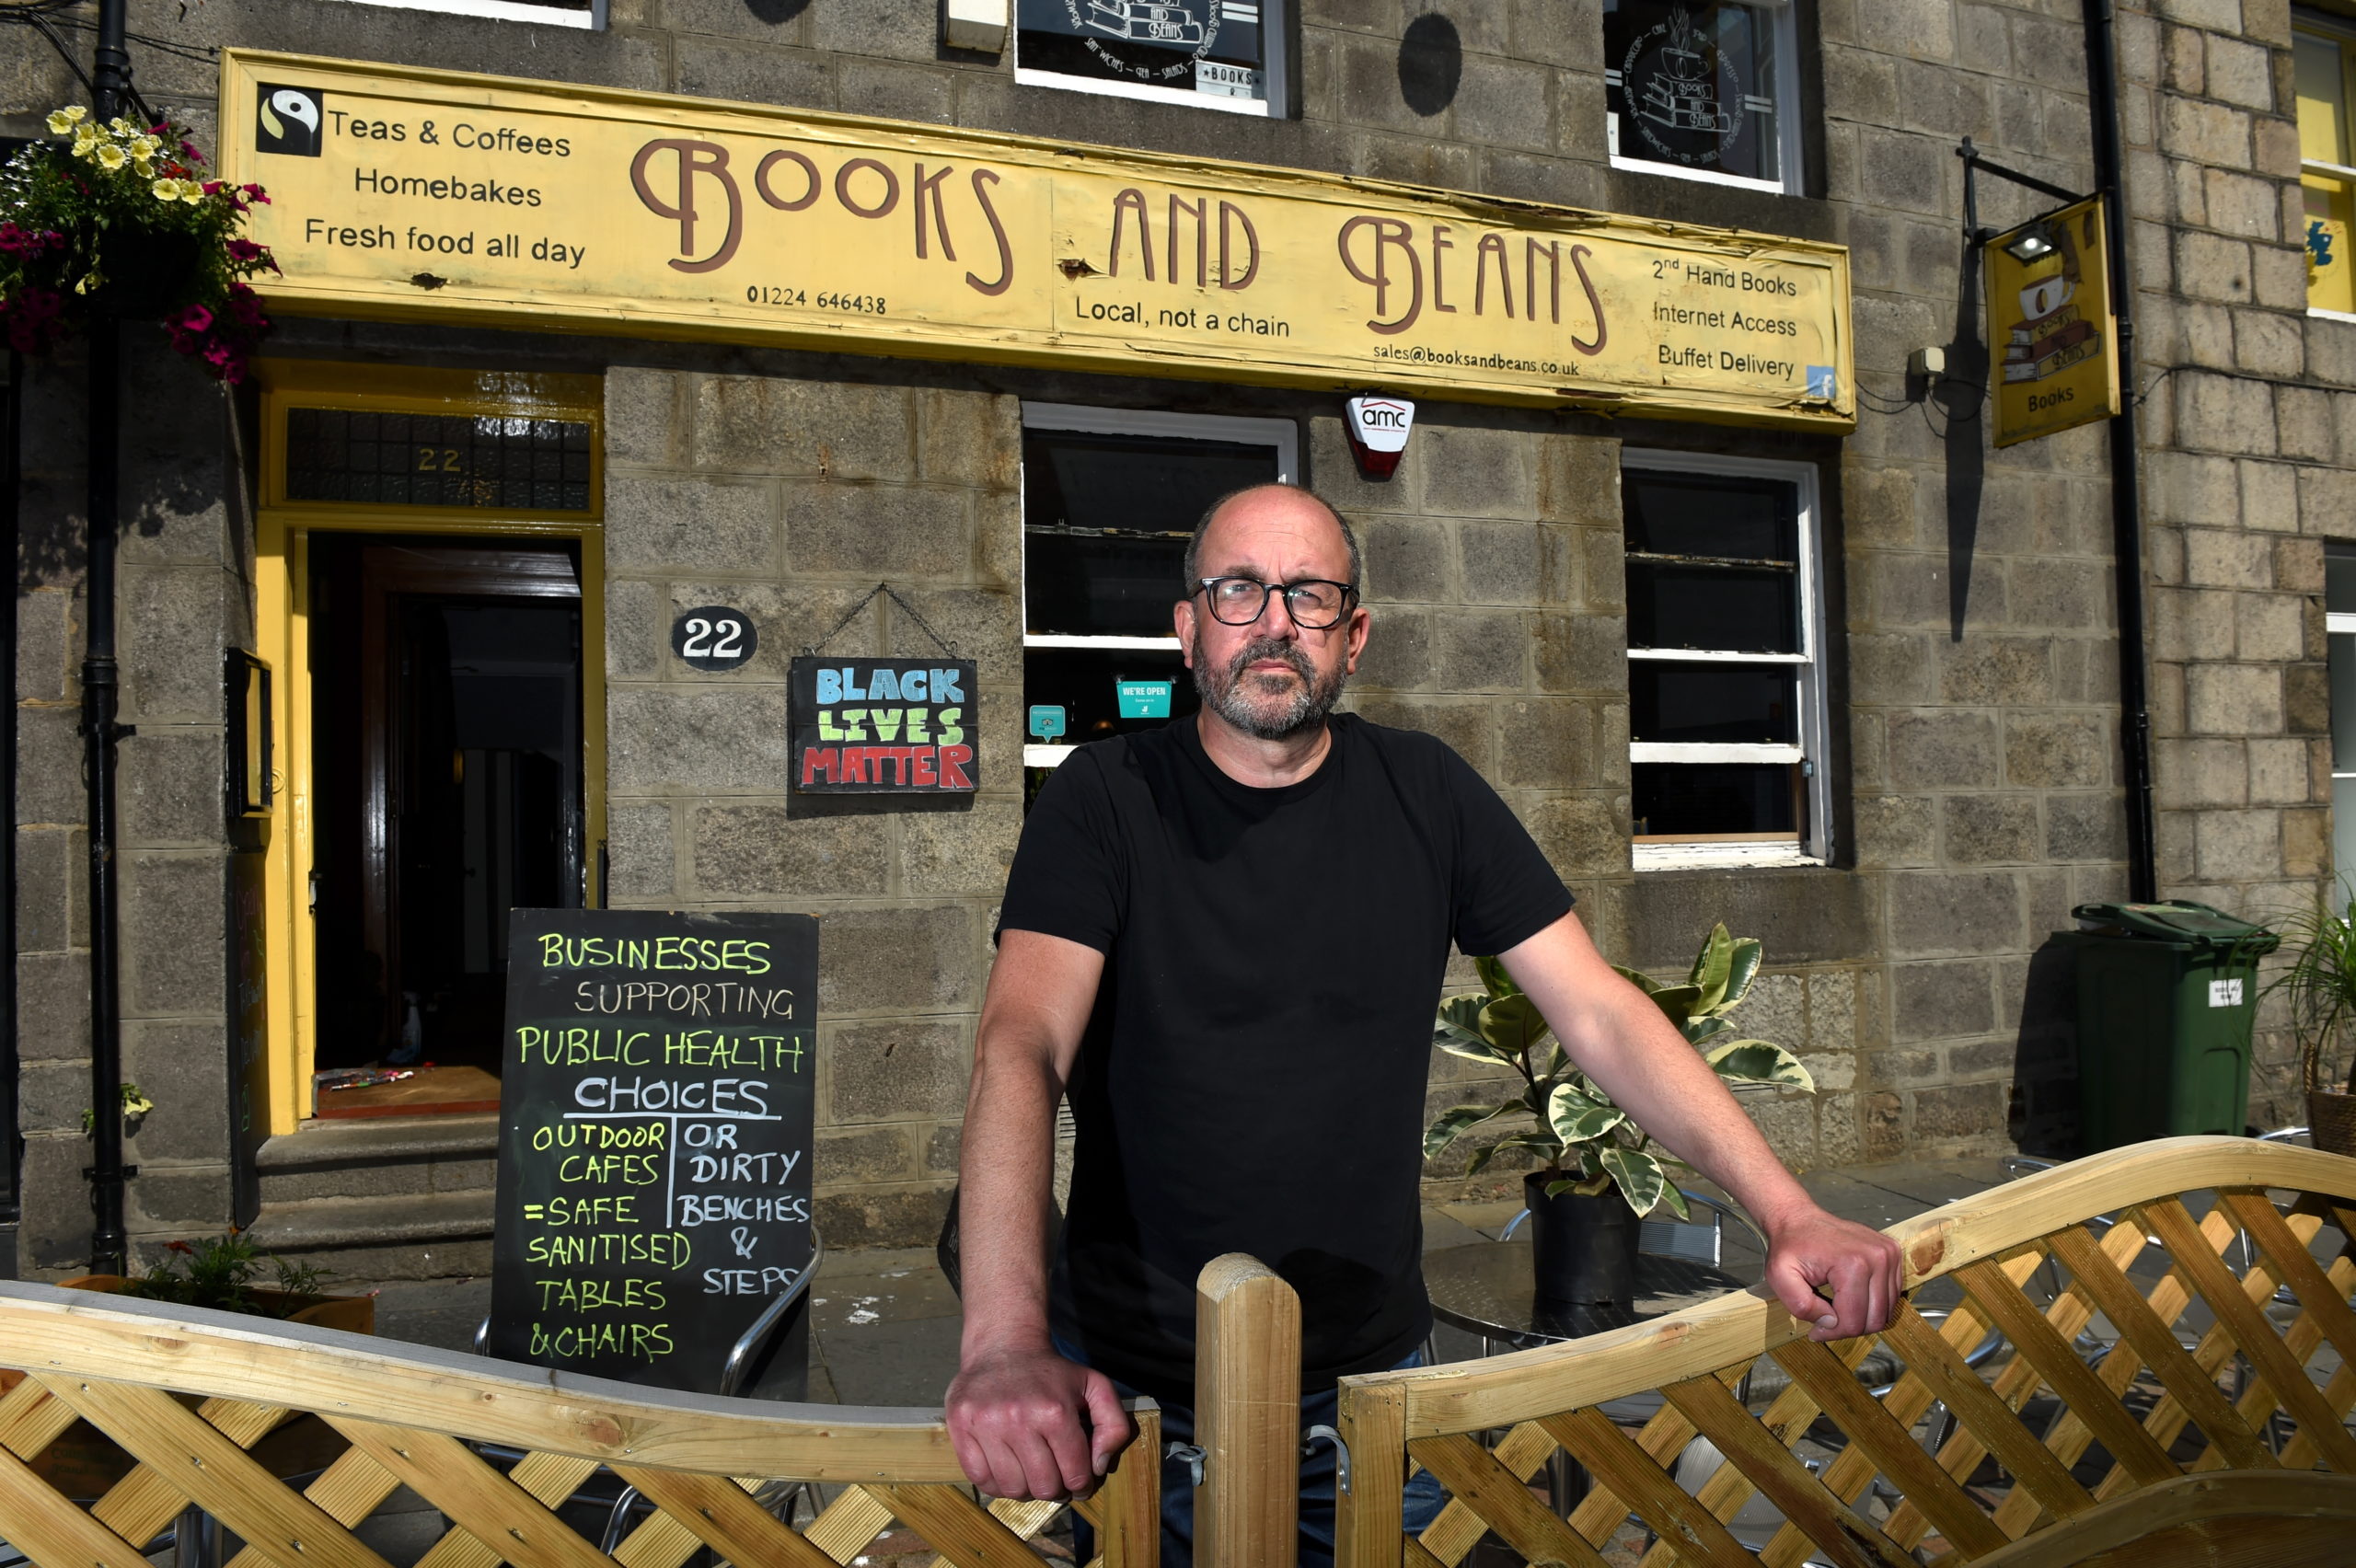 Books and Beans owner John Wigglesworth.